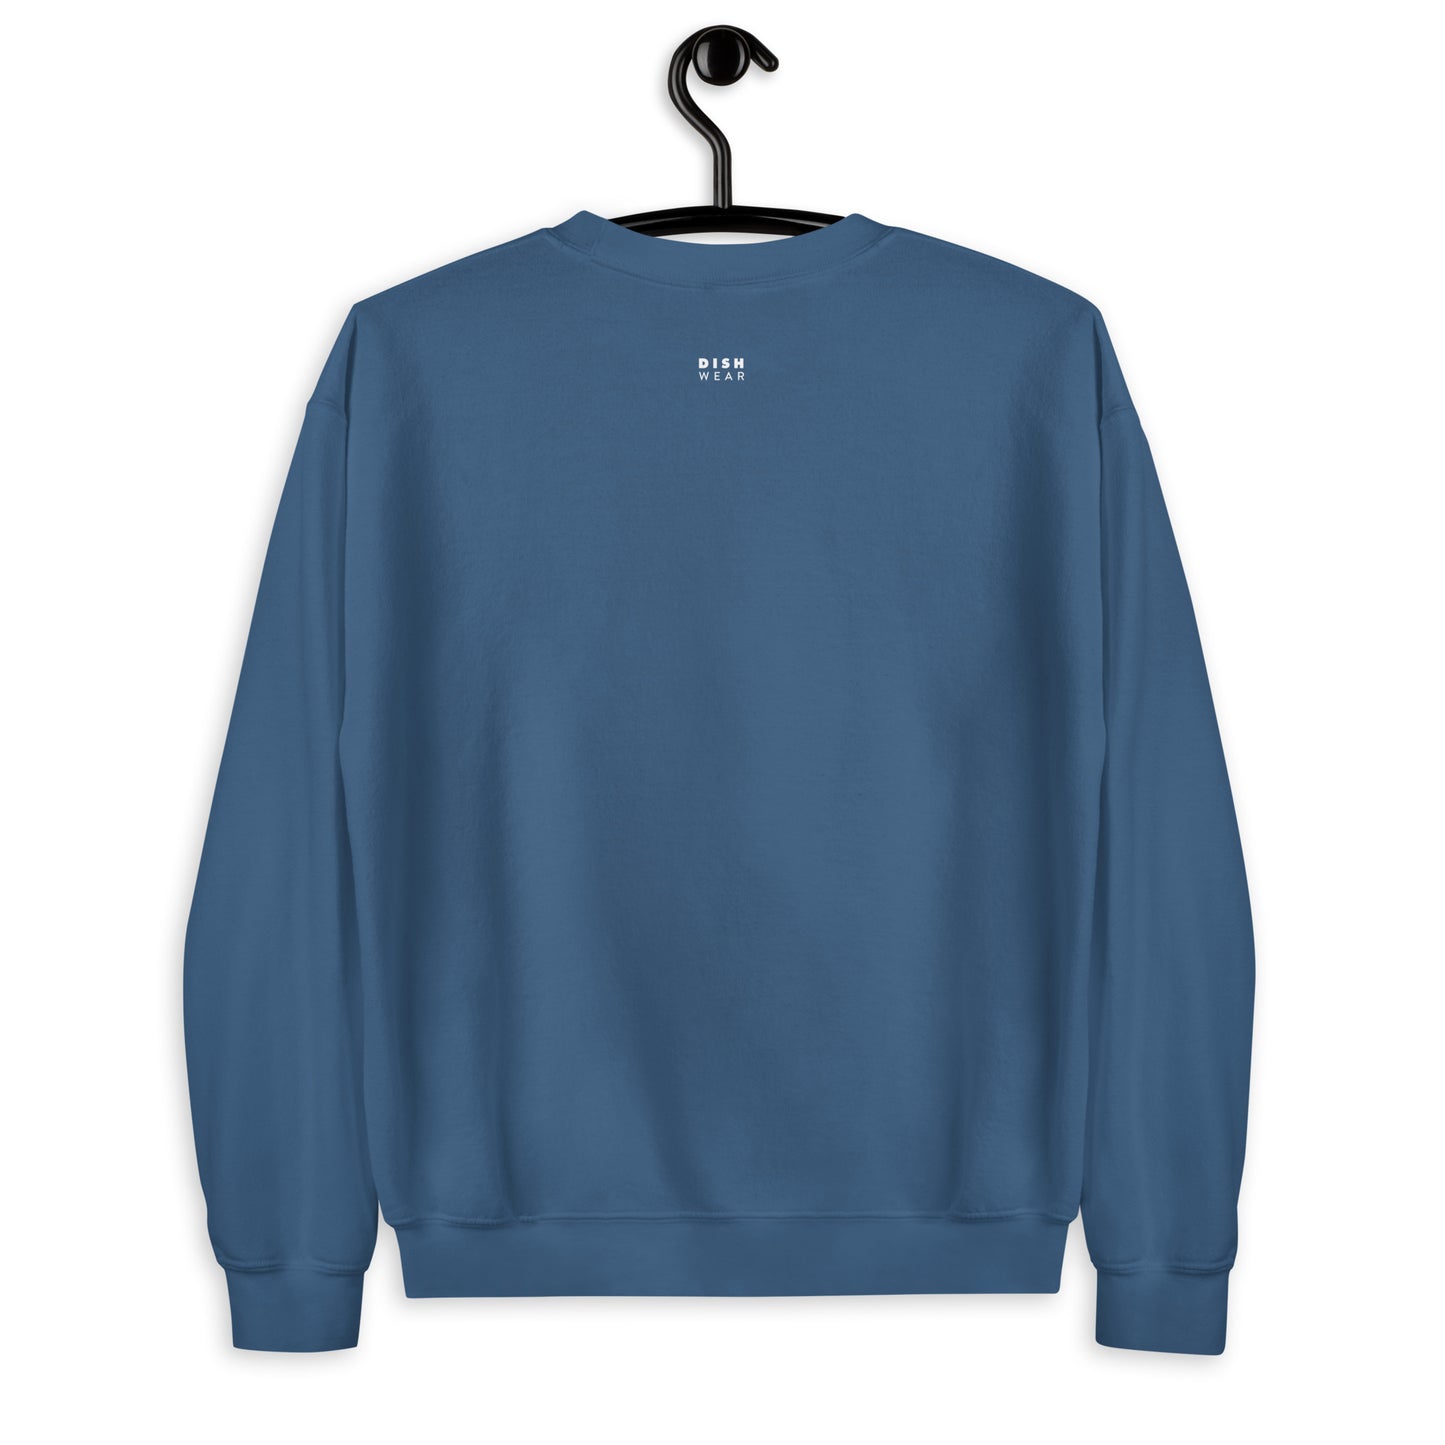 Buttered Rum Sweatshirt - Arched Font